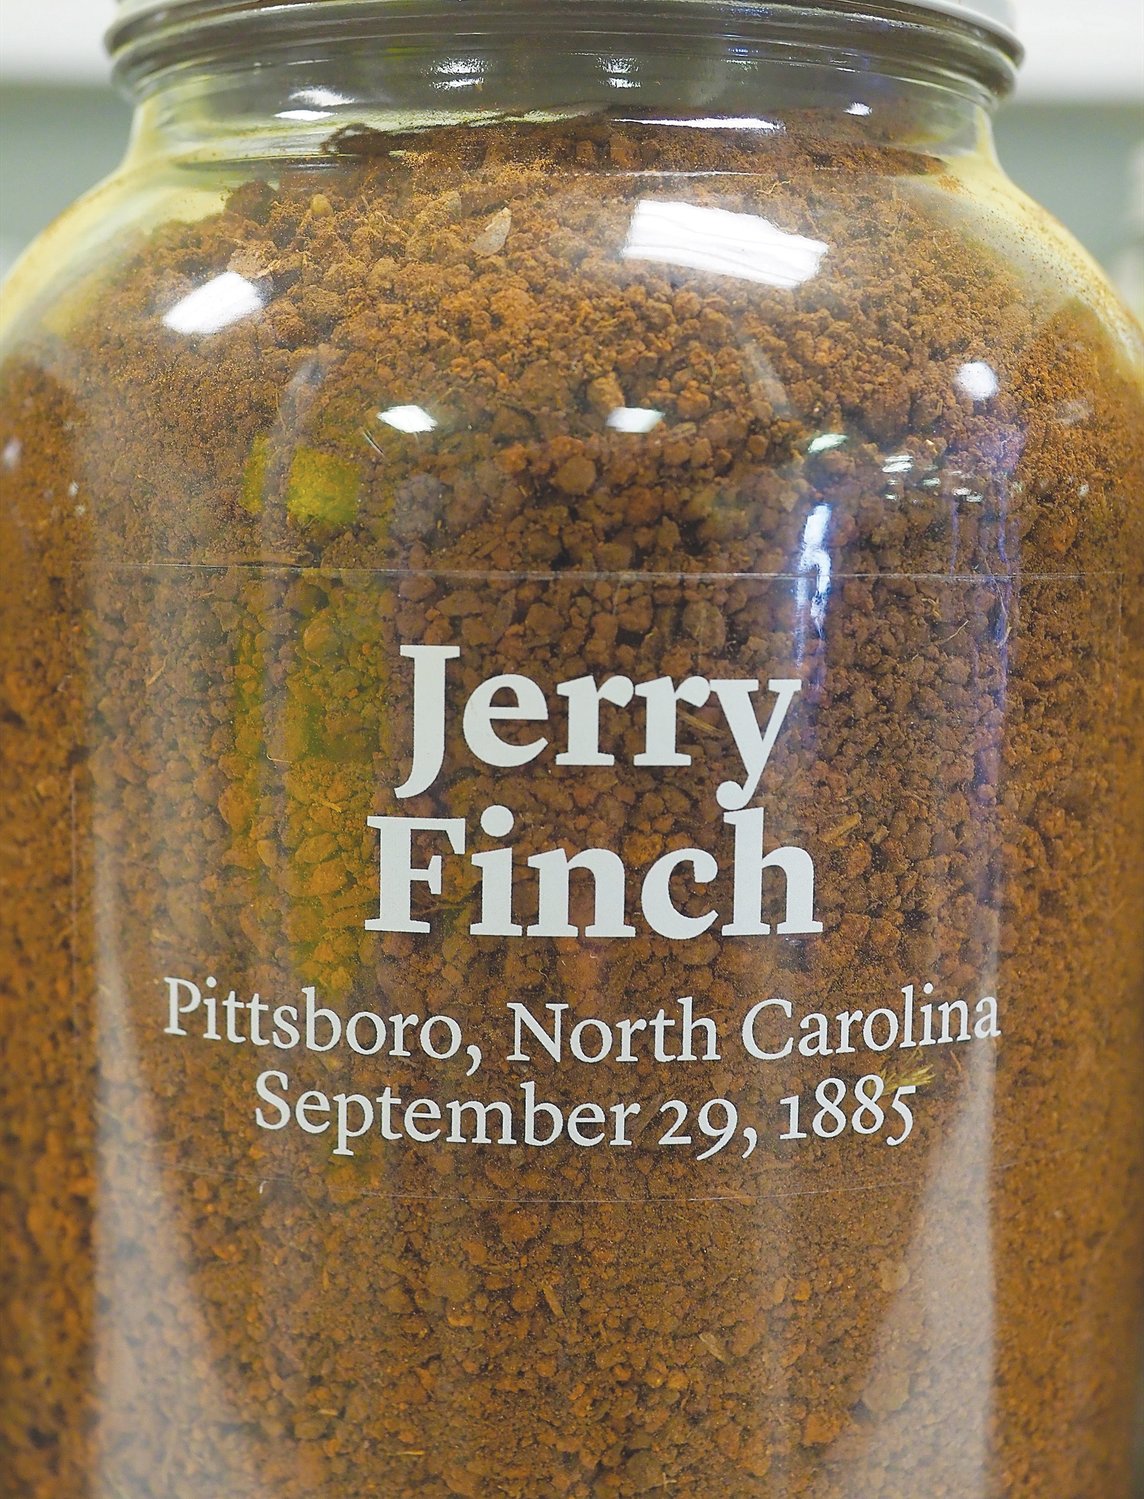 Soil from Jerry Finch's lynching site filled two identical jars. One will remain in Chatham County, while the other will be displayed at EJI's Legacy Museum in Montgomery, Alabama.